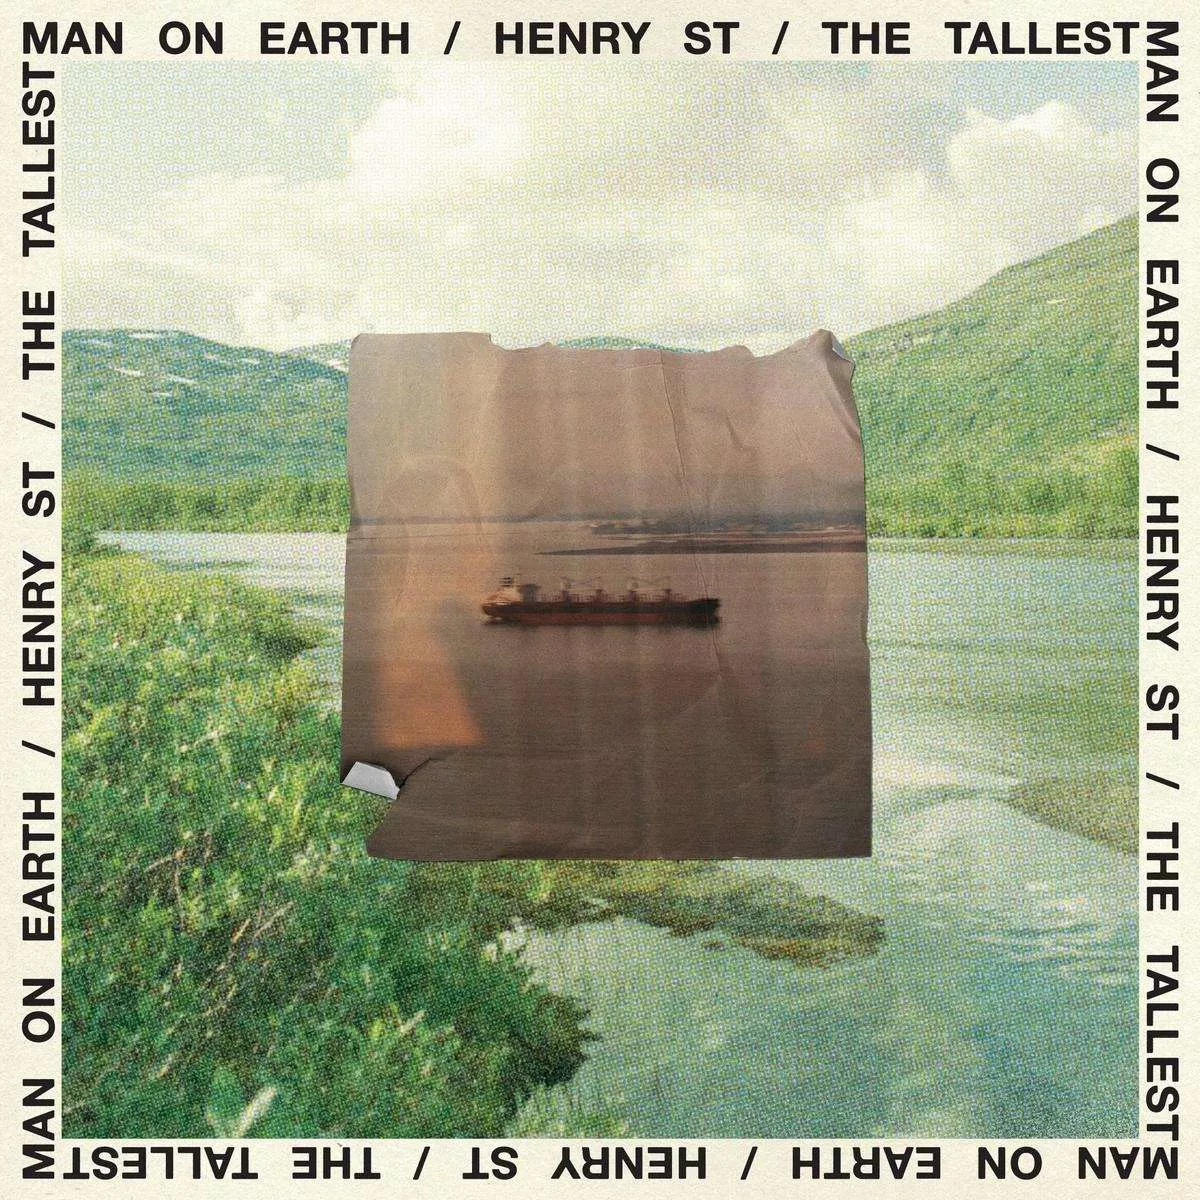 Henry St.  - The Tallest Man on Earth 